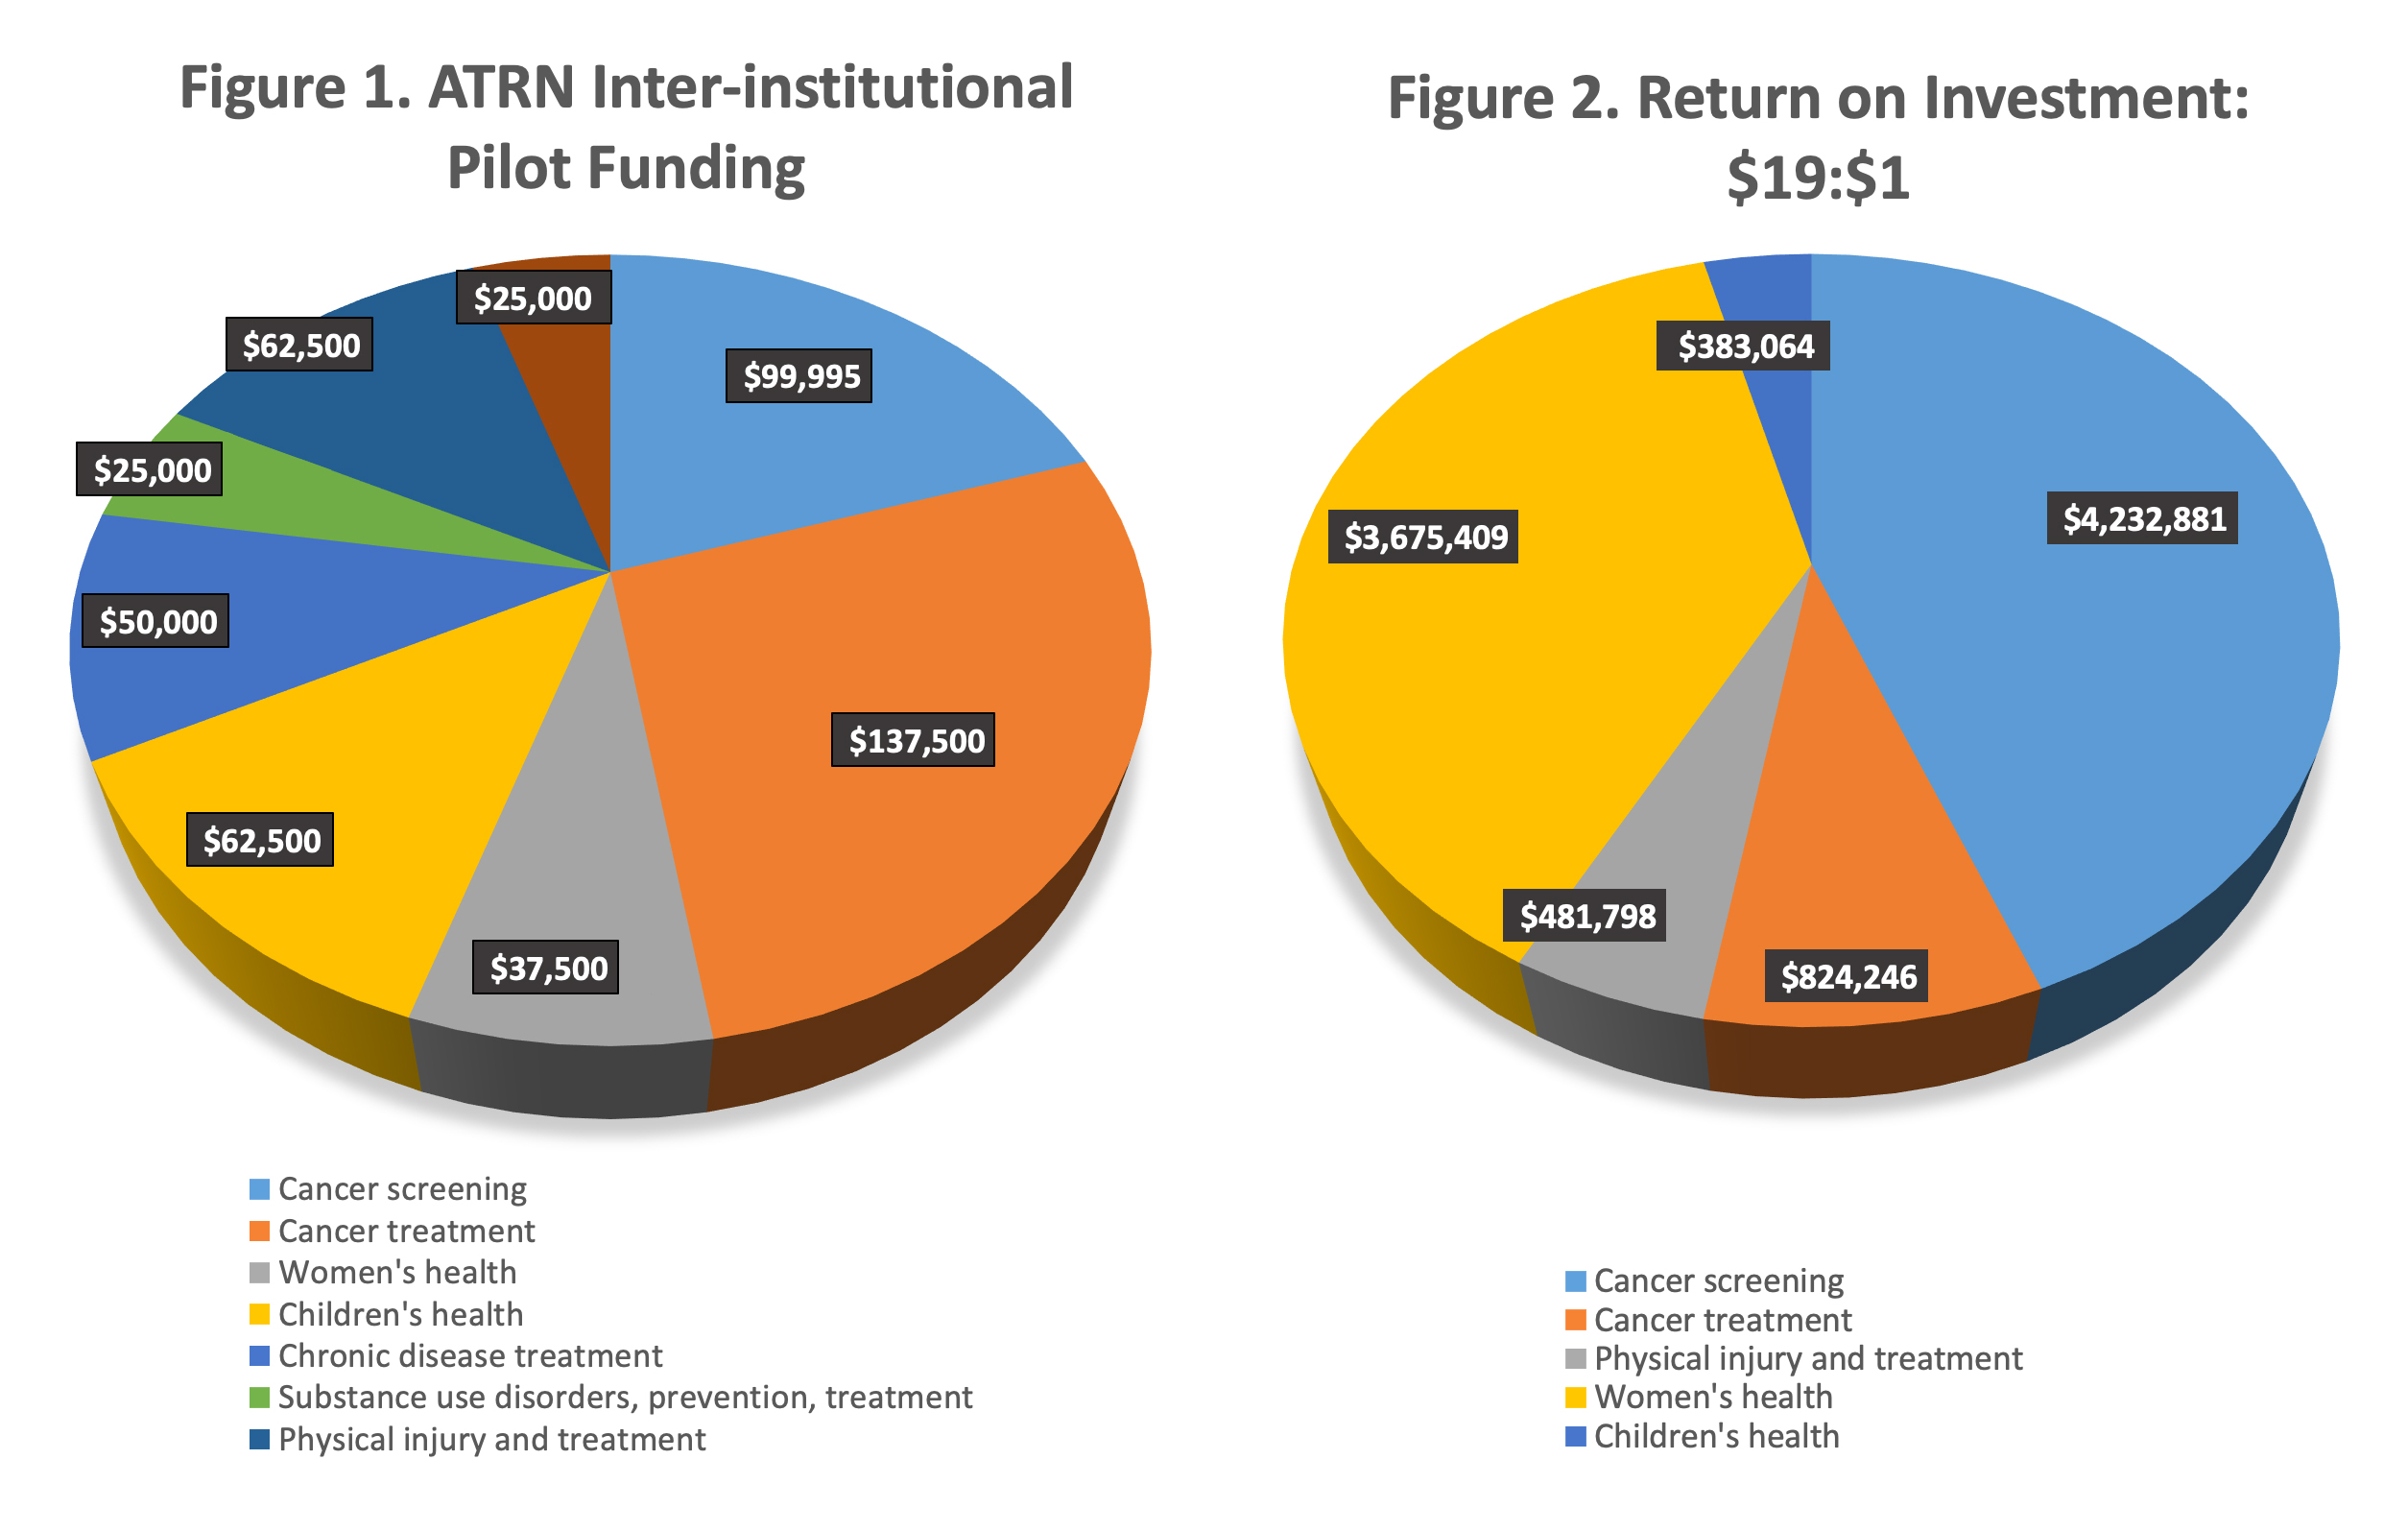 ATRN Interinstitutional Pilot Funding and Return on Investment Table.